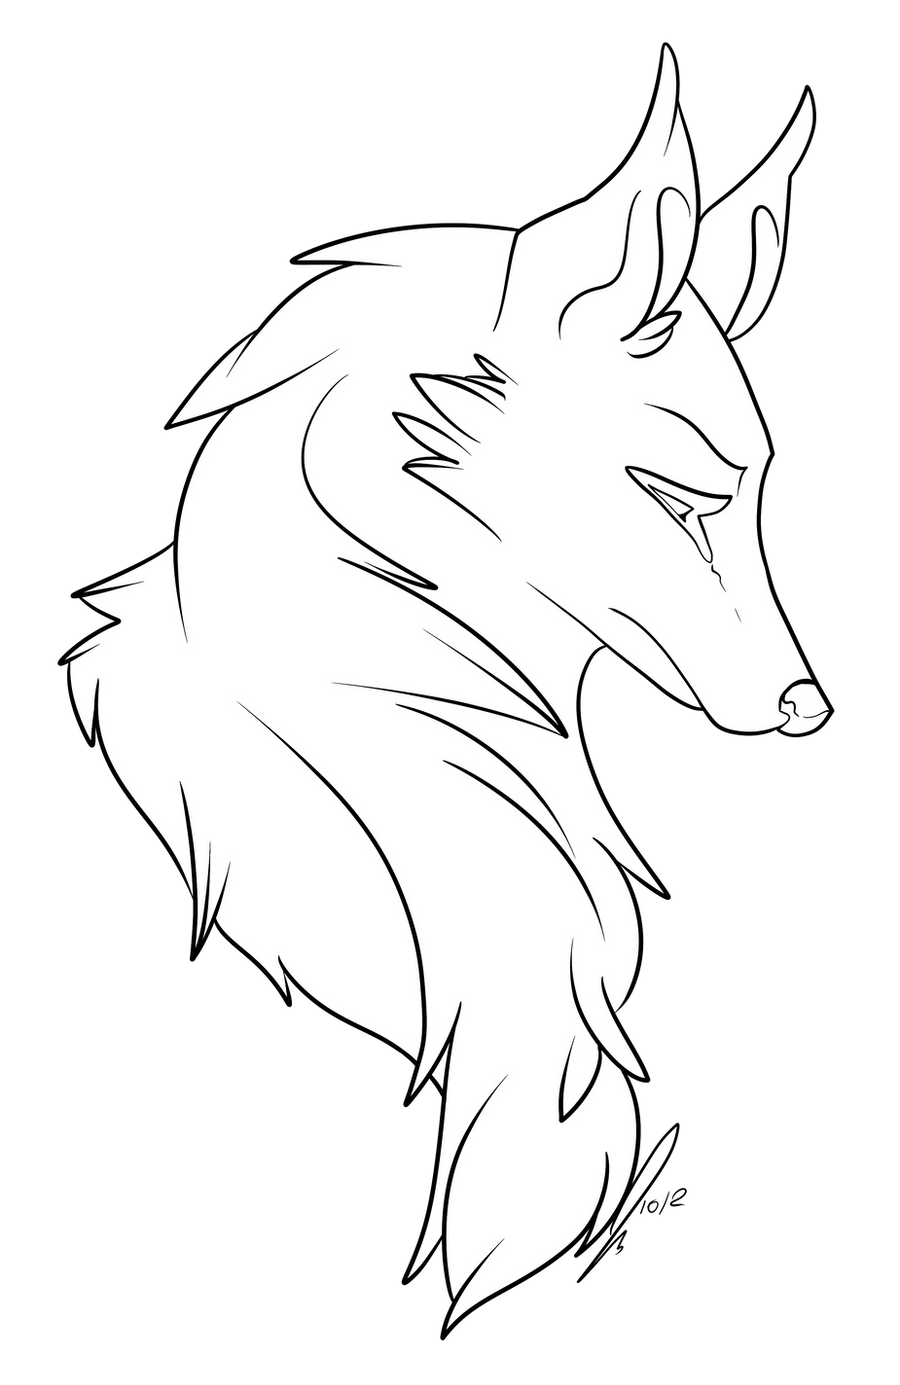 Wolf Bust Lines by jaclynonacloudlines on DeviantArt